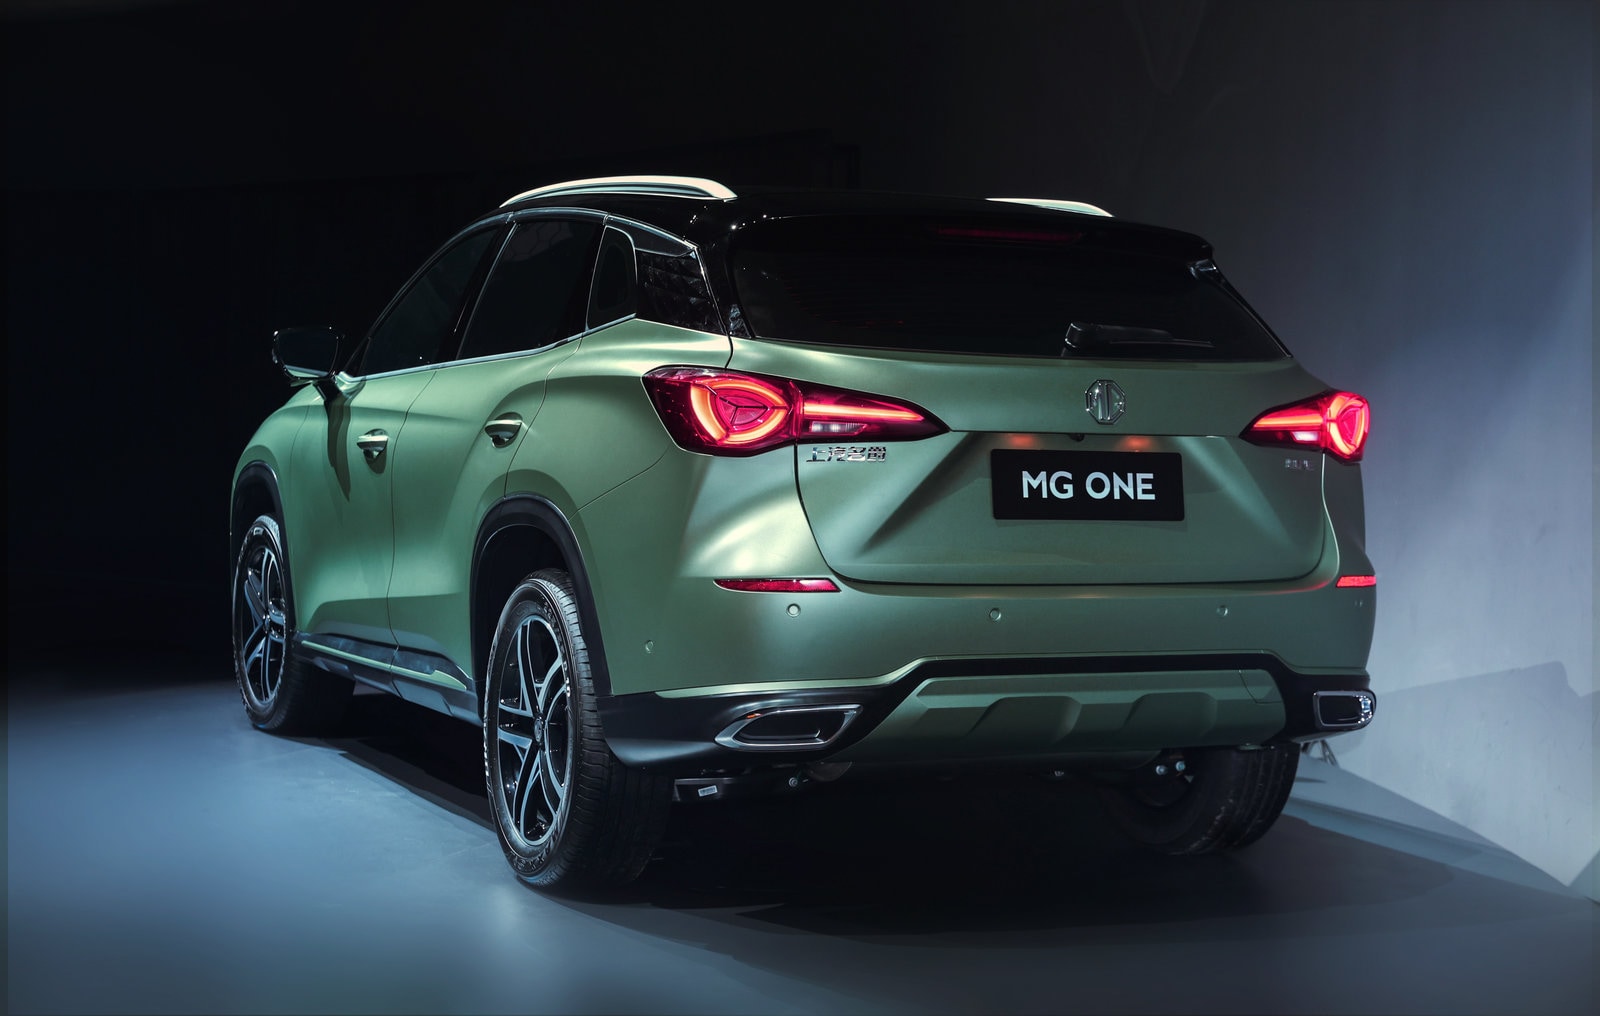 The rear profile of MG One SUV.